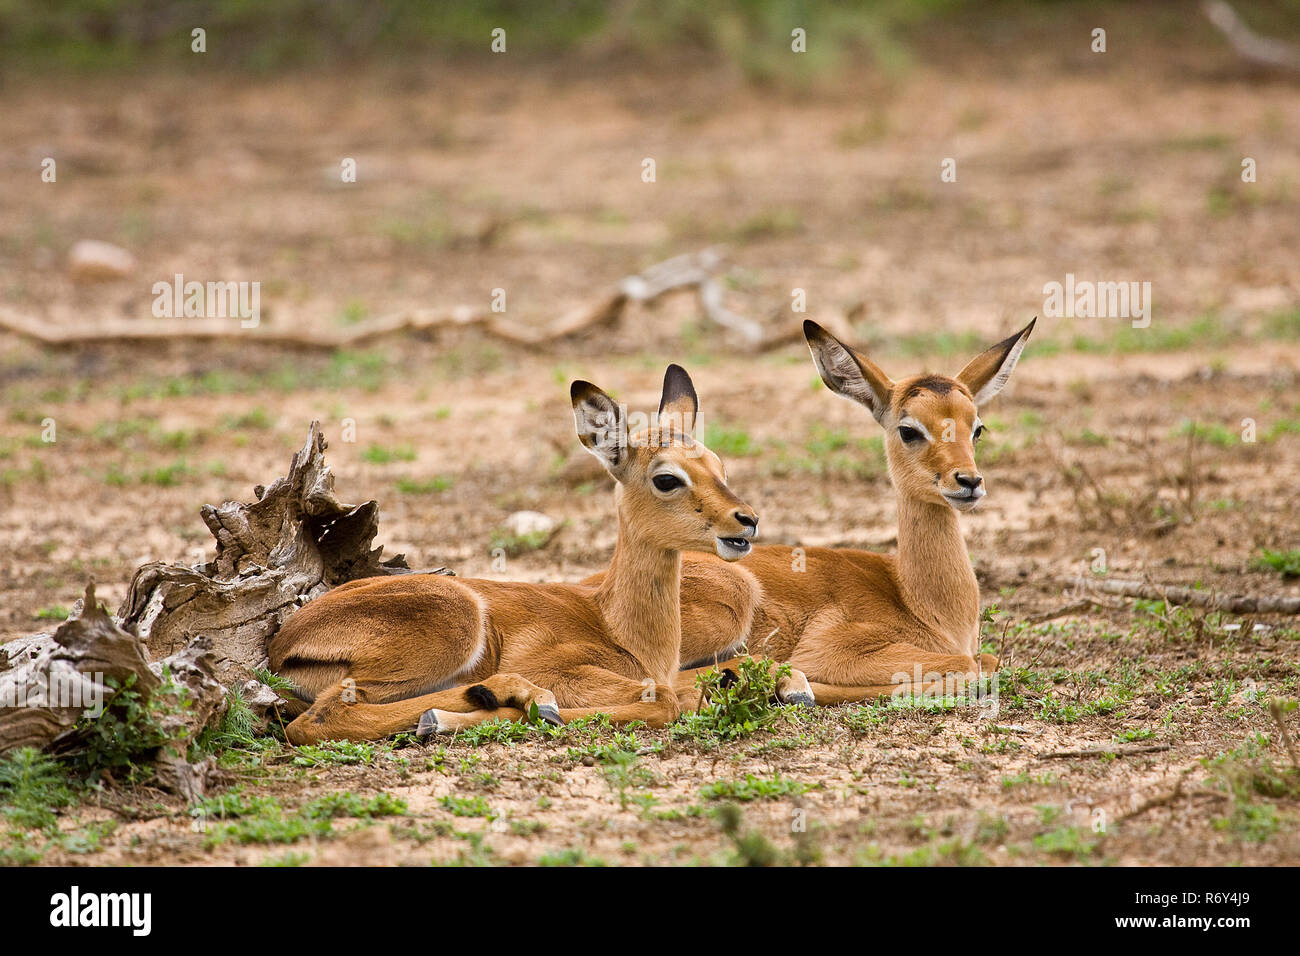 two wild baby impalas having a nap in the bush, Kruger, South Africa Stock Photo